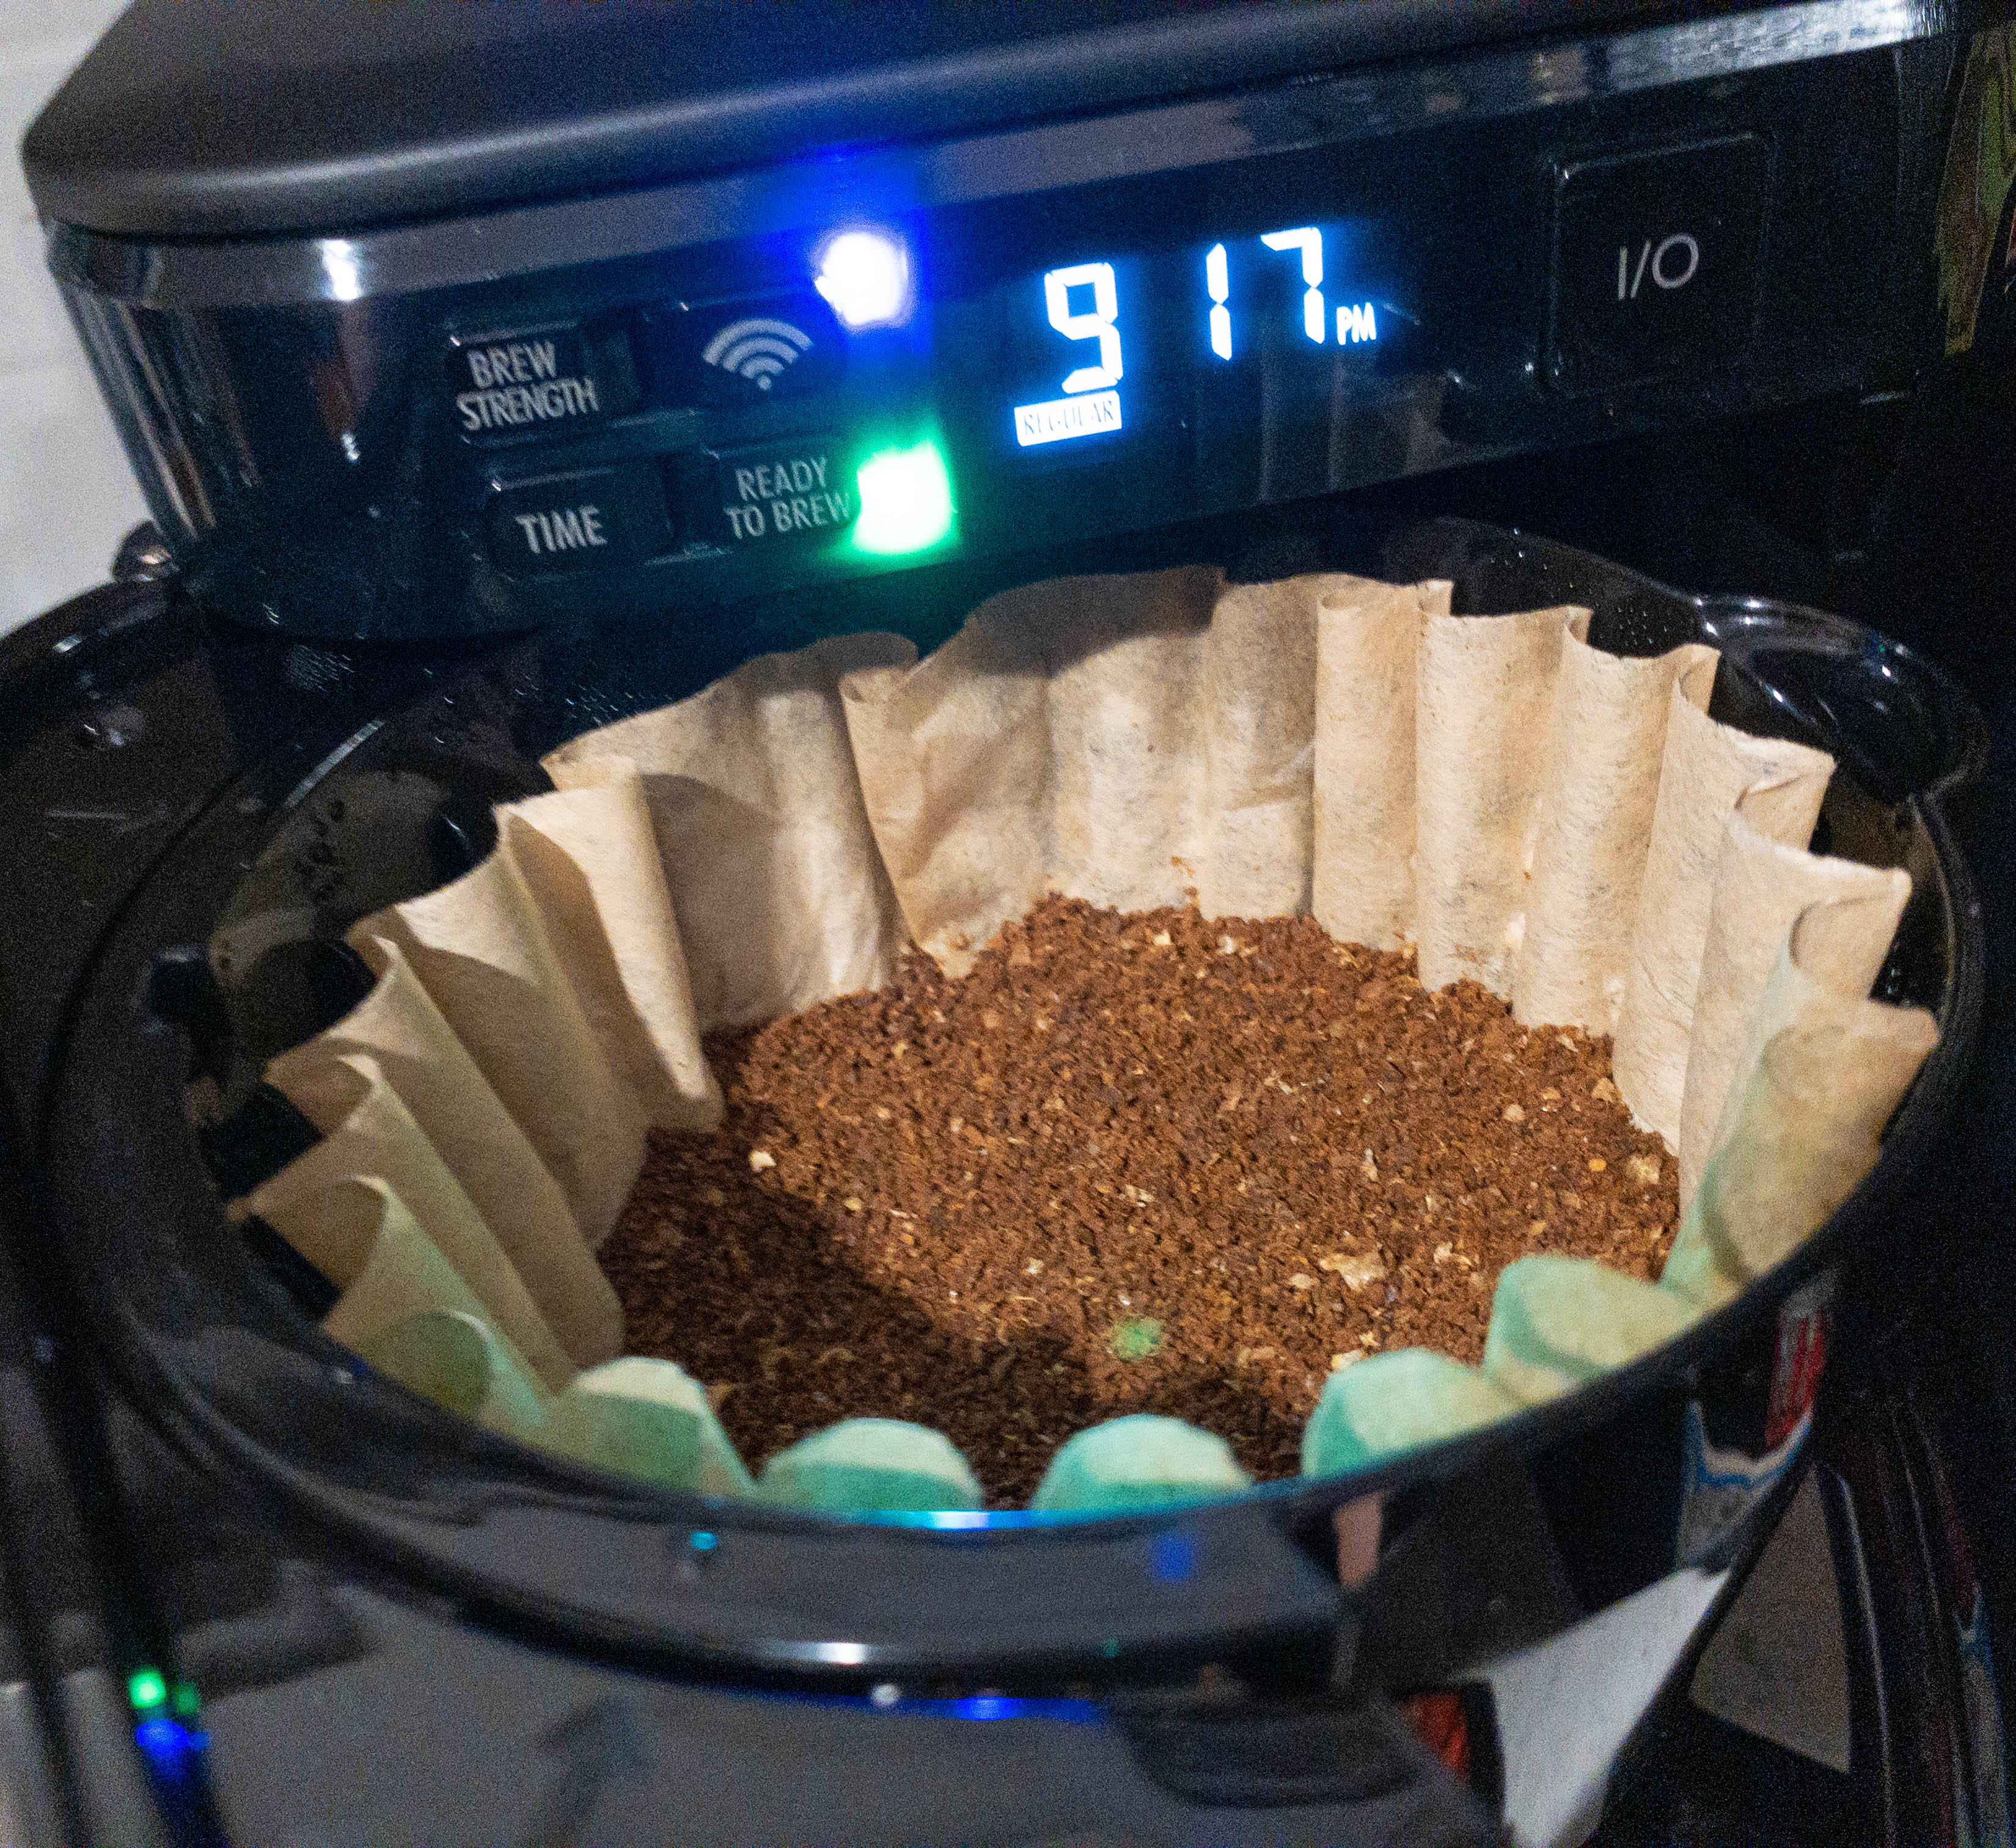 Hamilton Beach Smart Coffee Maker review: Does it really work?